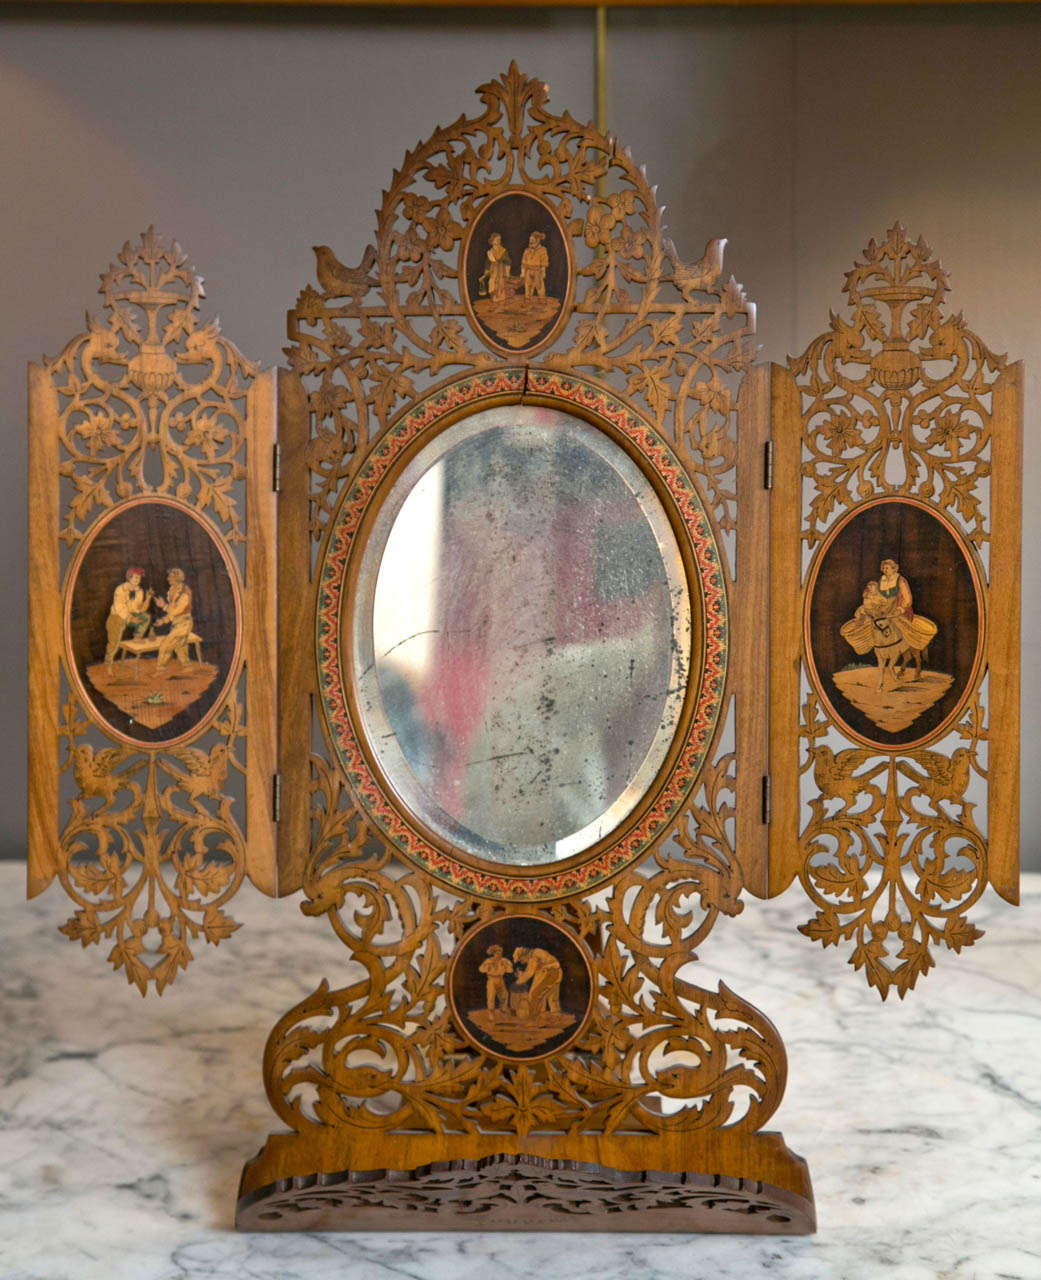 A late 19th Century Italian Sorrento Souvenir Carved Olive-wood and Inlaid in various and exotic woods Table Mirror.

Dimensions, 19.5